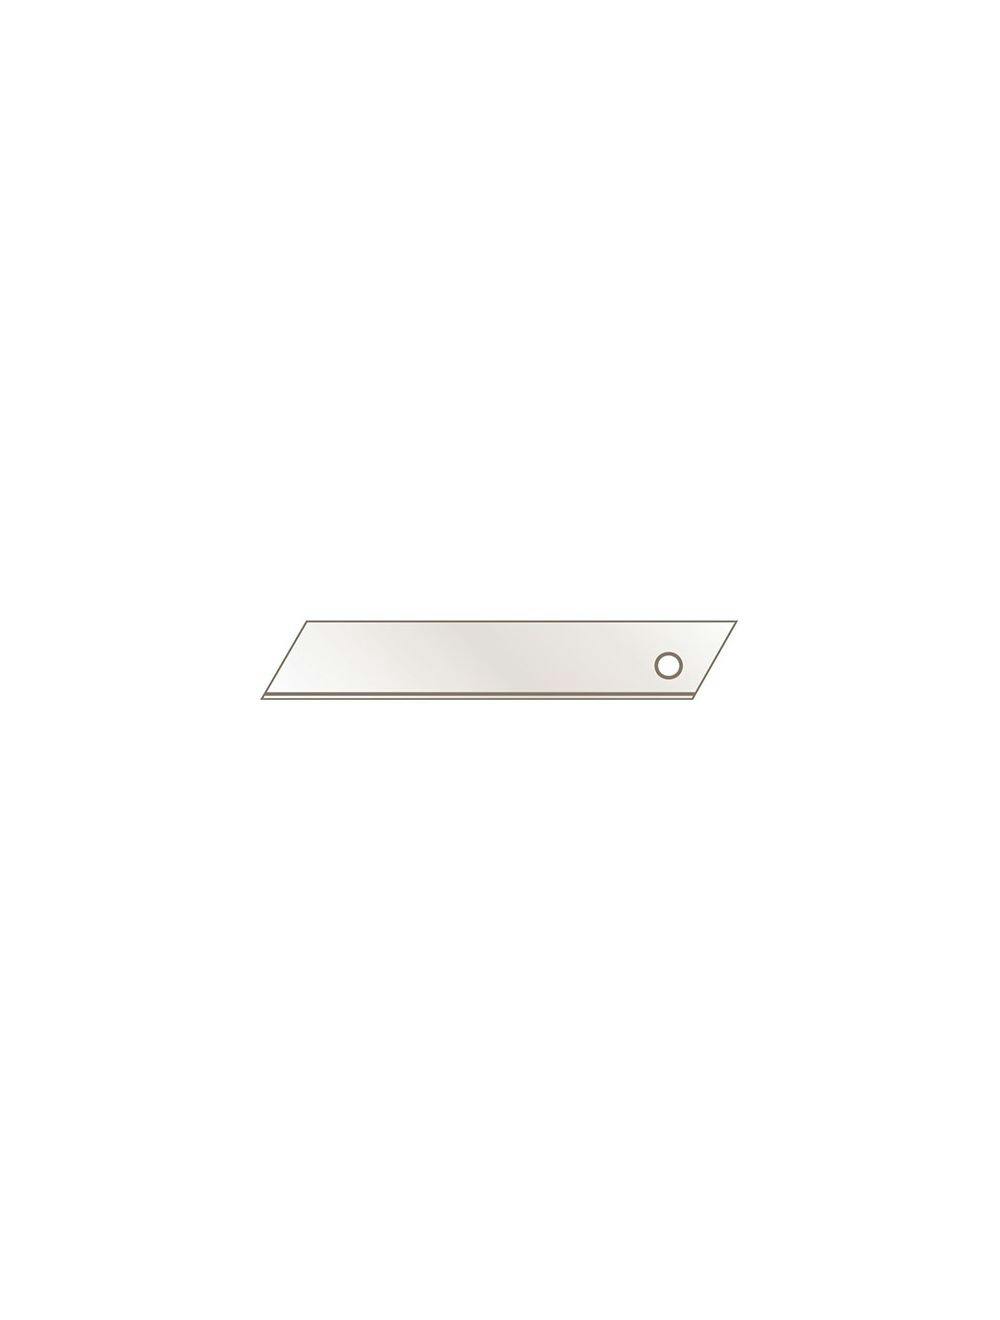 Martor Styropor Blade No. 179, 18 mm, Stainless (Pack Of 10)